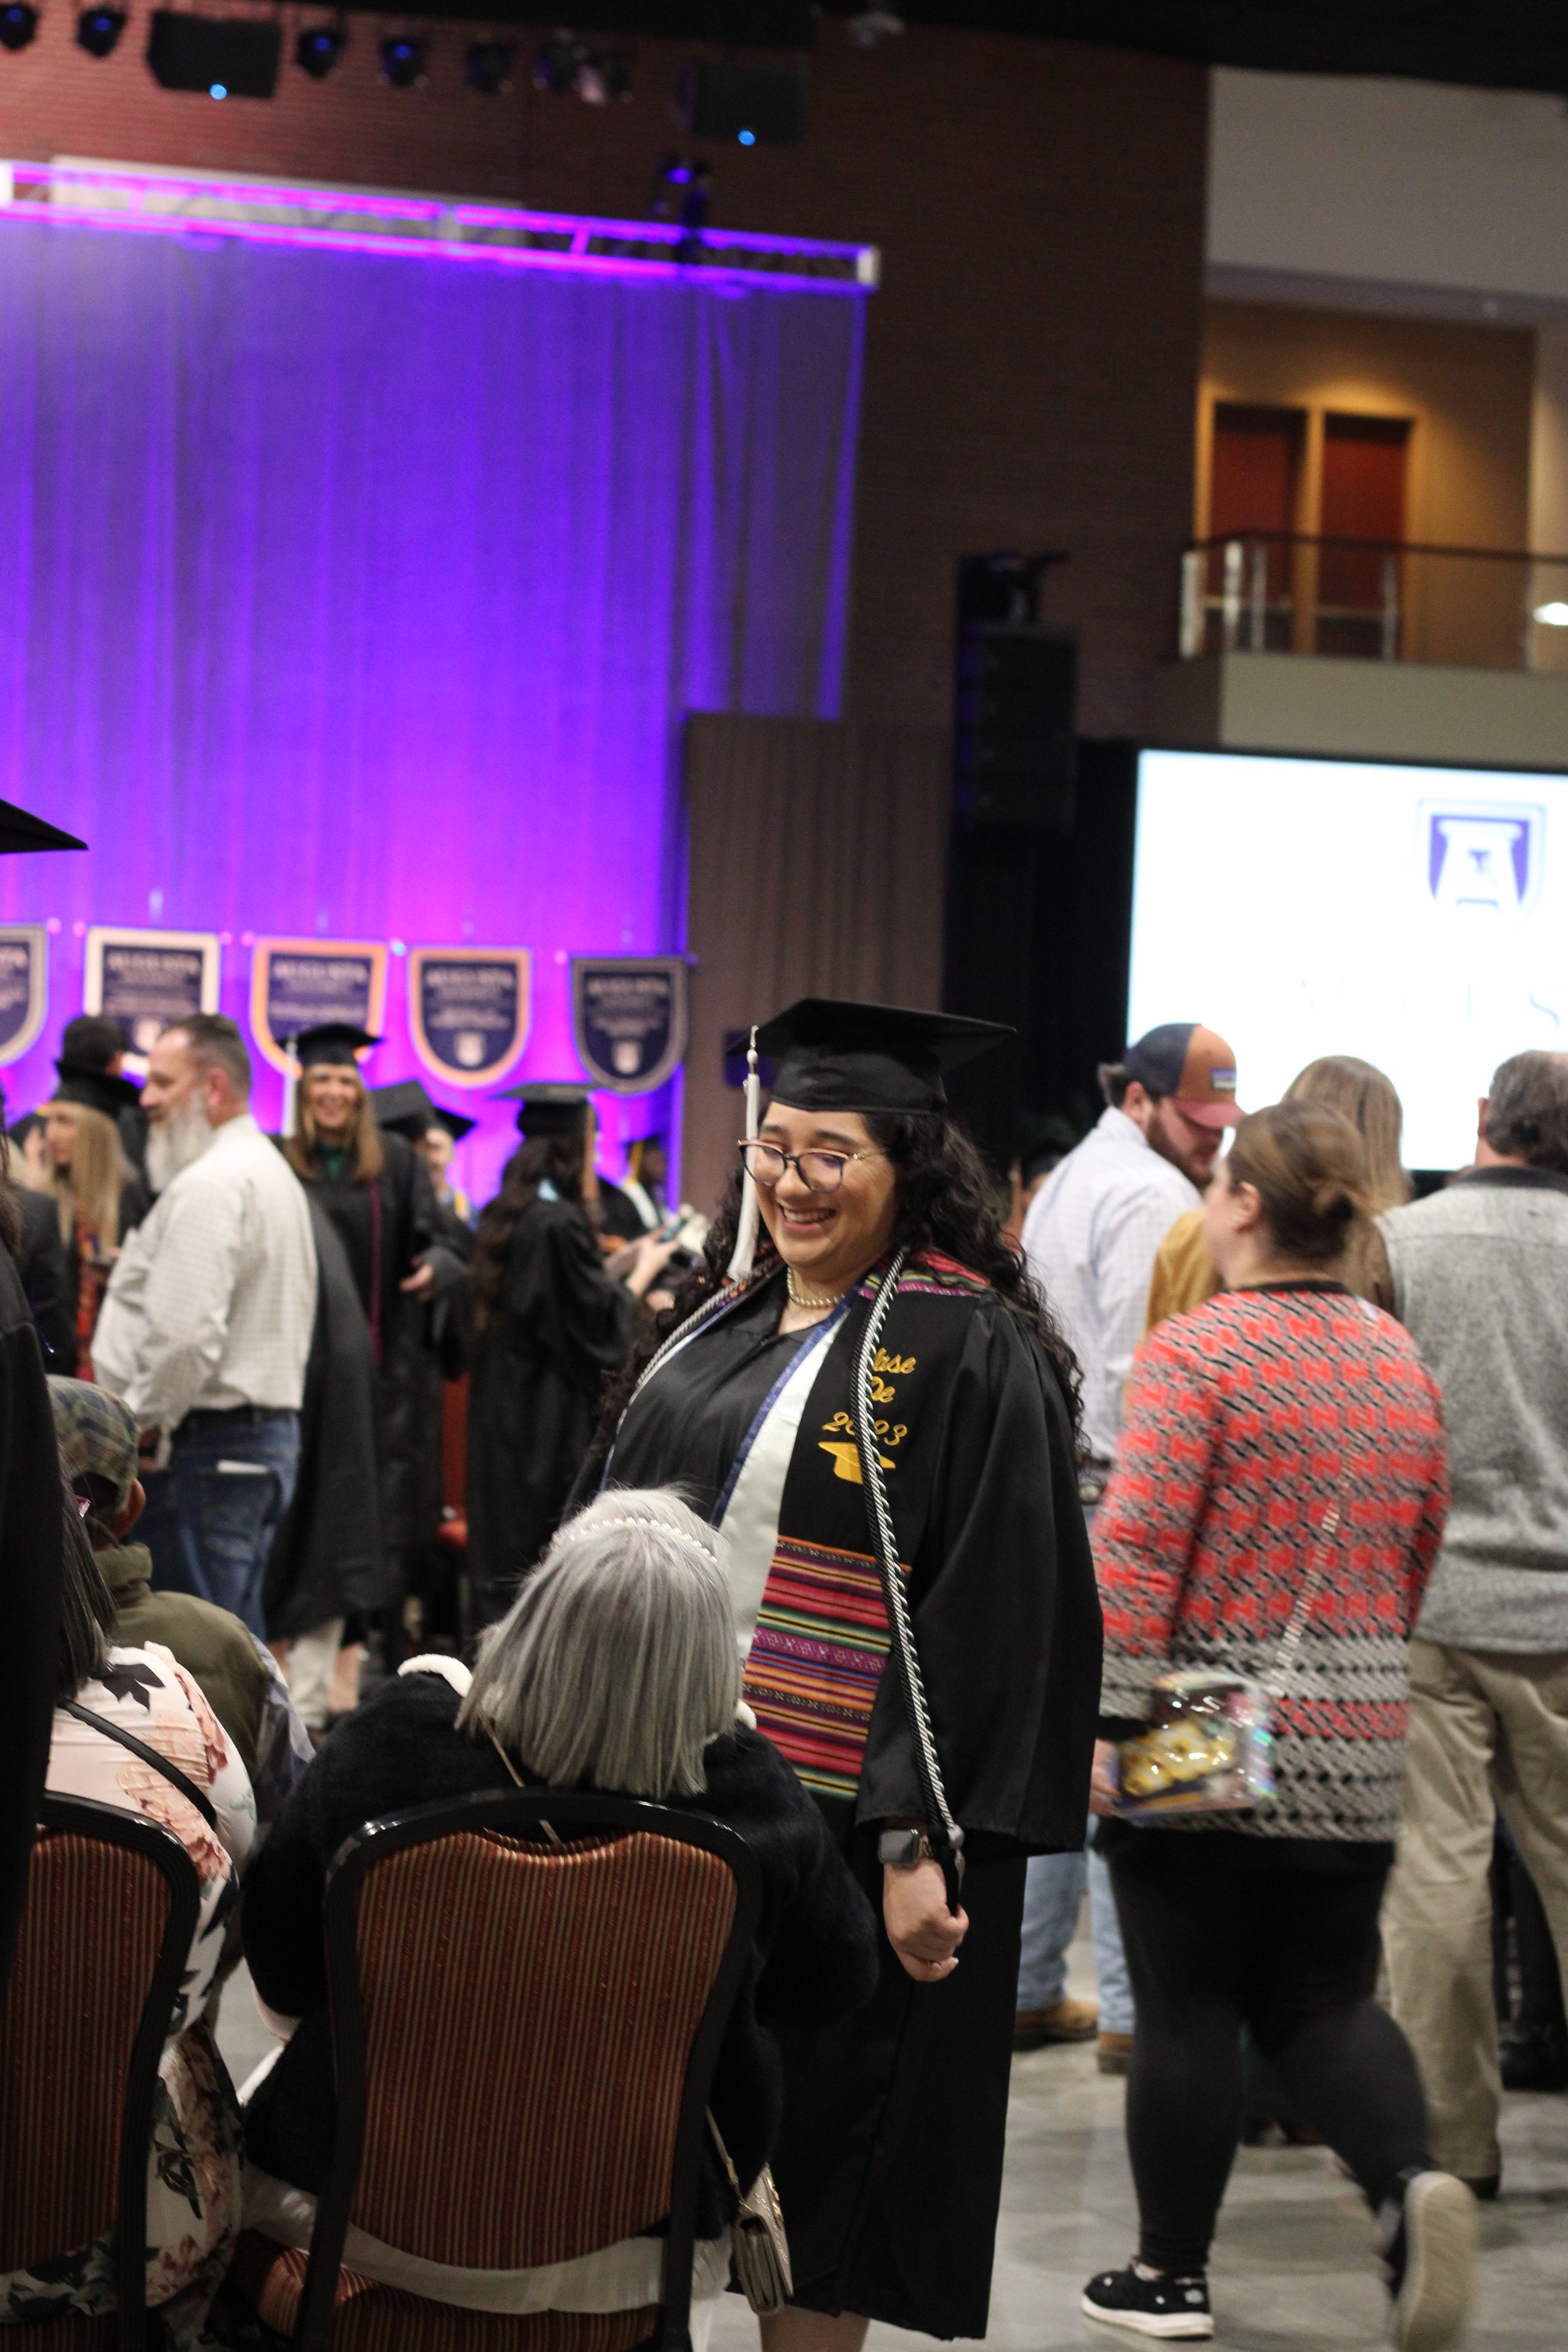  Students speak with their families at commencement.  (photo by Rakiyah Lenon)  